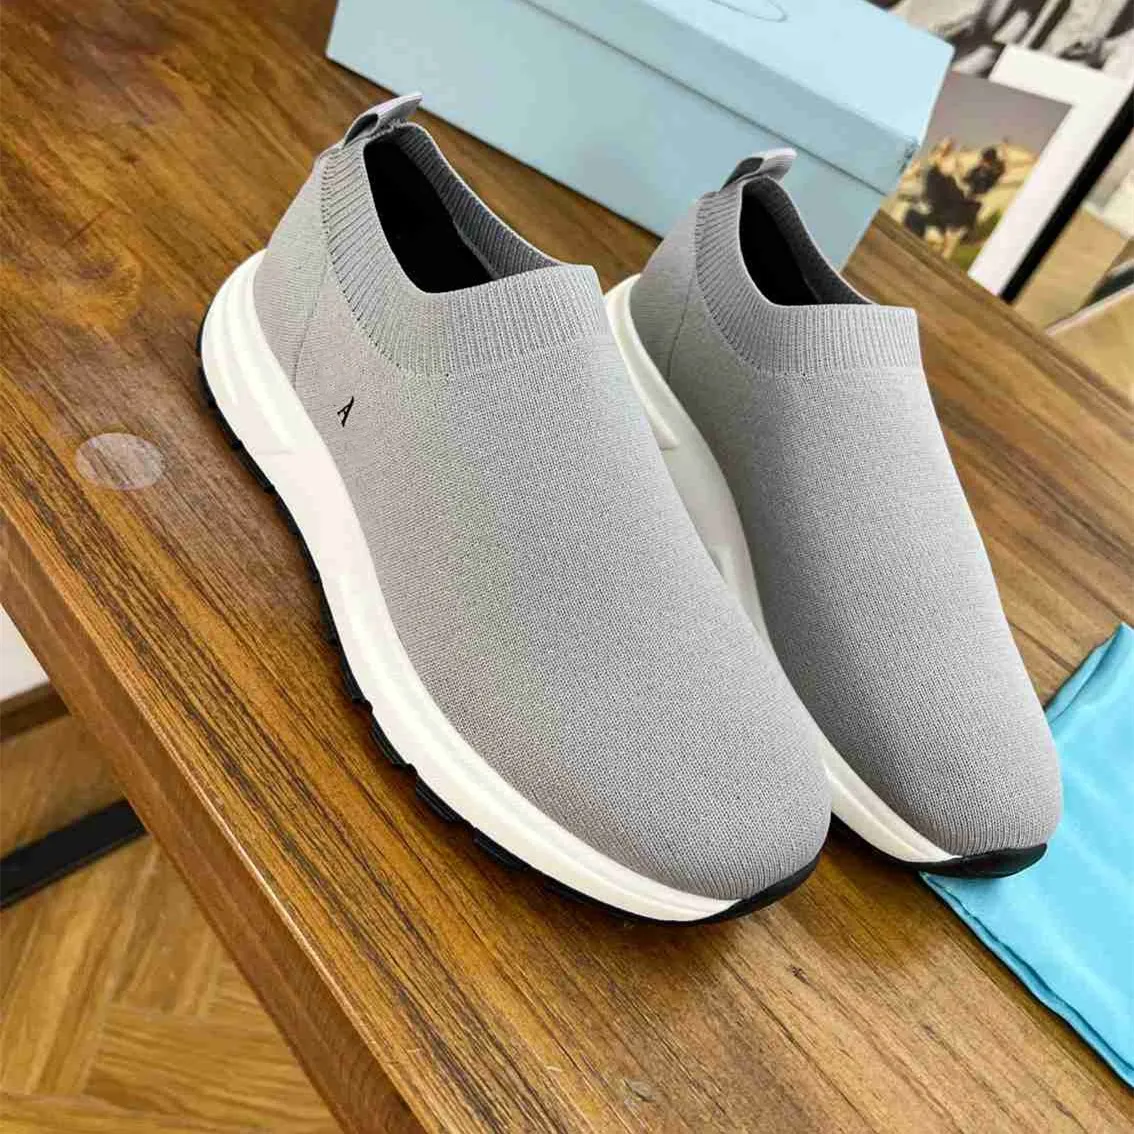 24.82 US$-Comemore New Women Mesh Platform Sneakers Trainers White Shoe  10cm High Heels Wedges Thick Bottom Breathable Casual Sho-Description